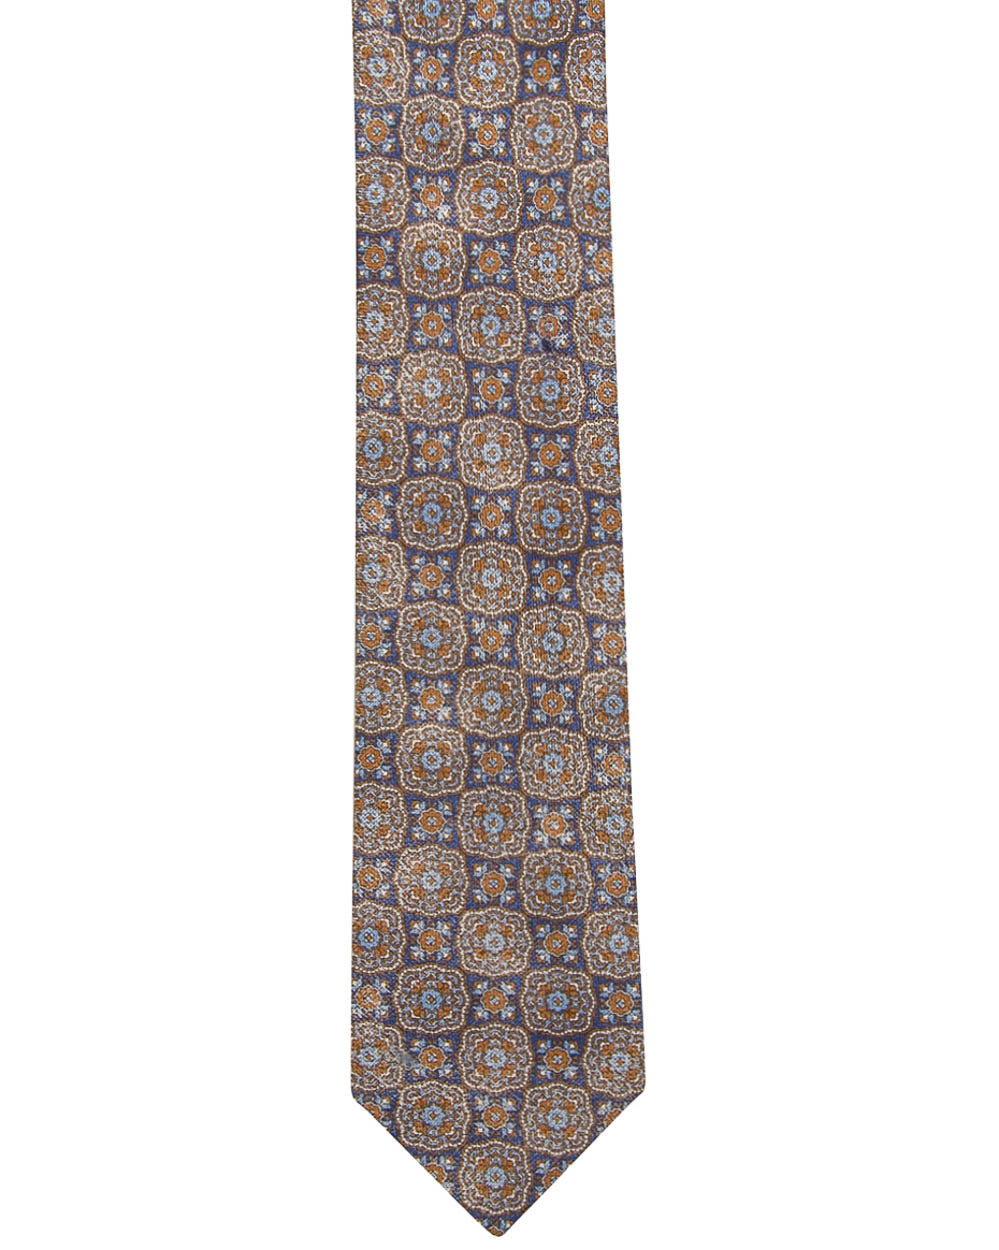 Blue with Burnt Orange and Sky Blue Medallion Tie